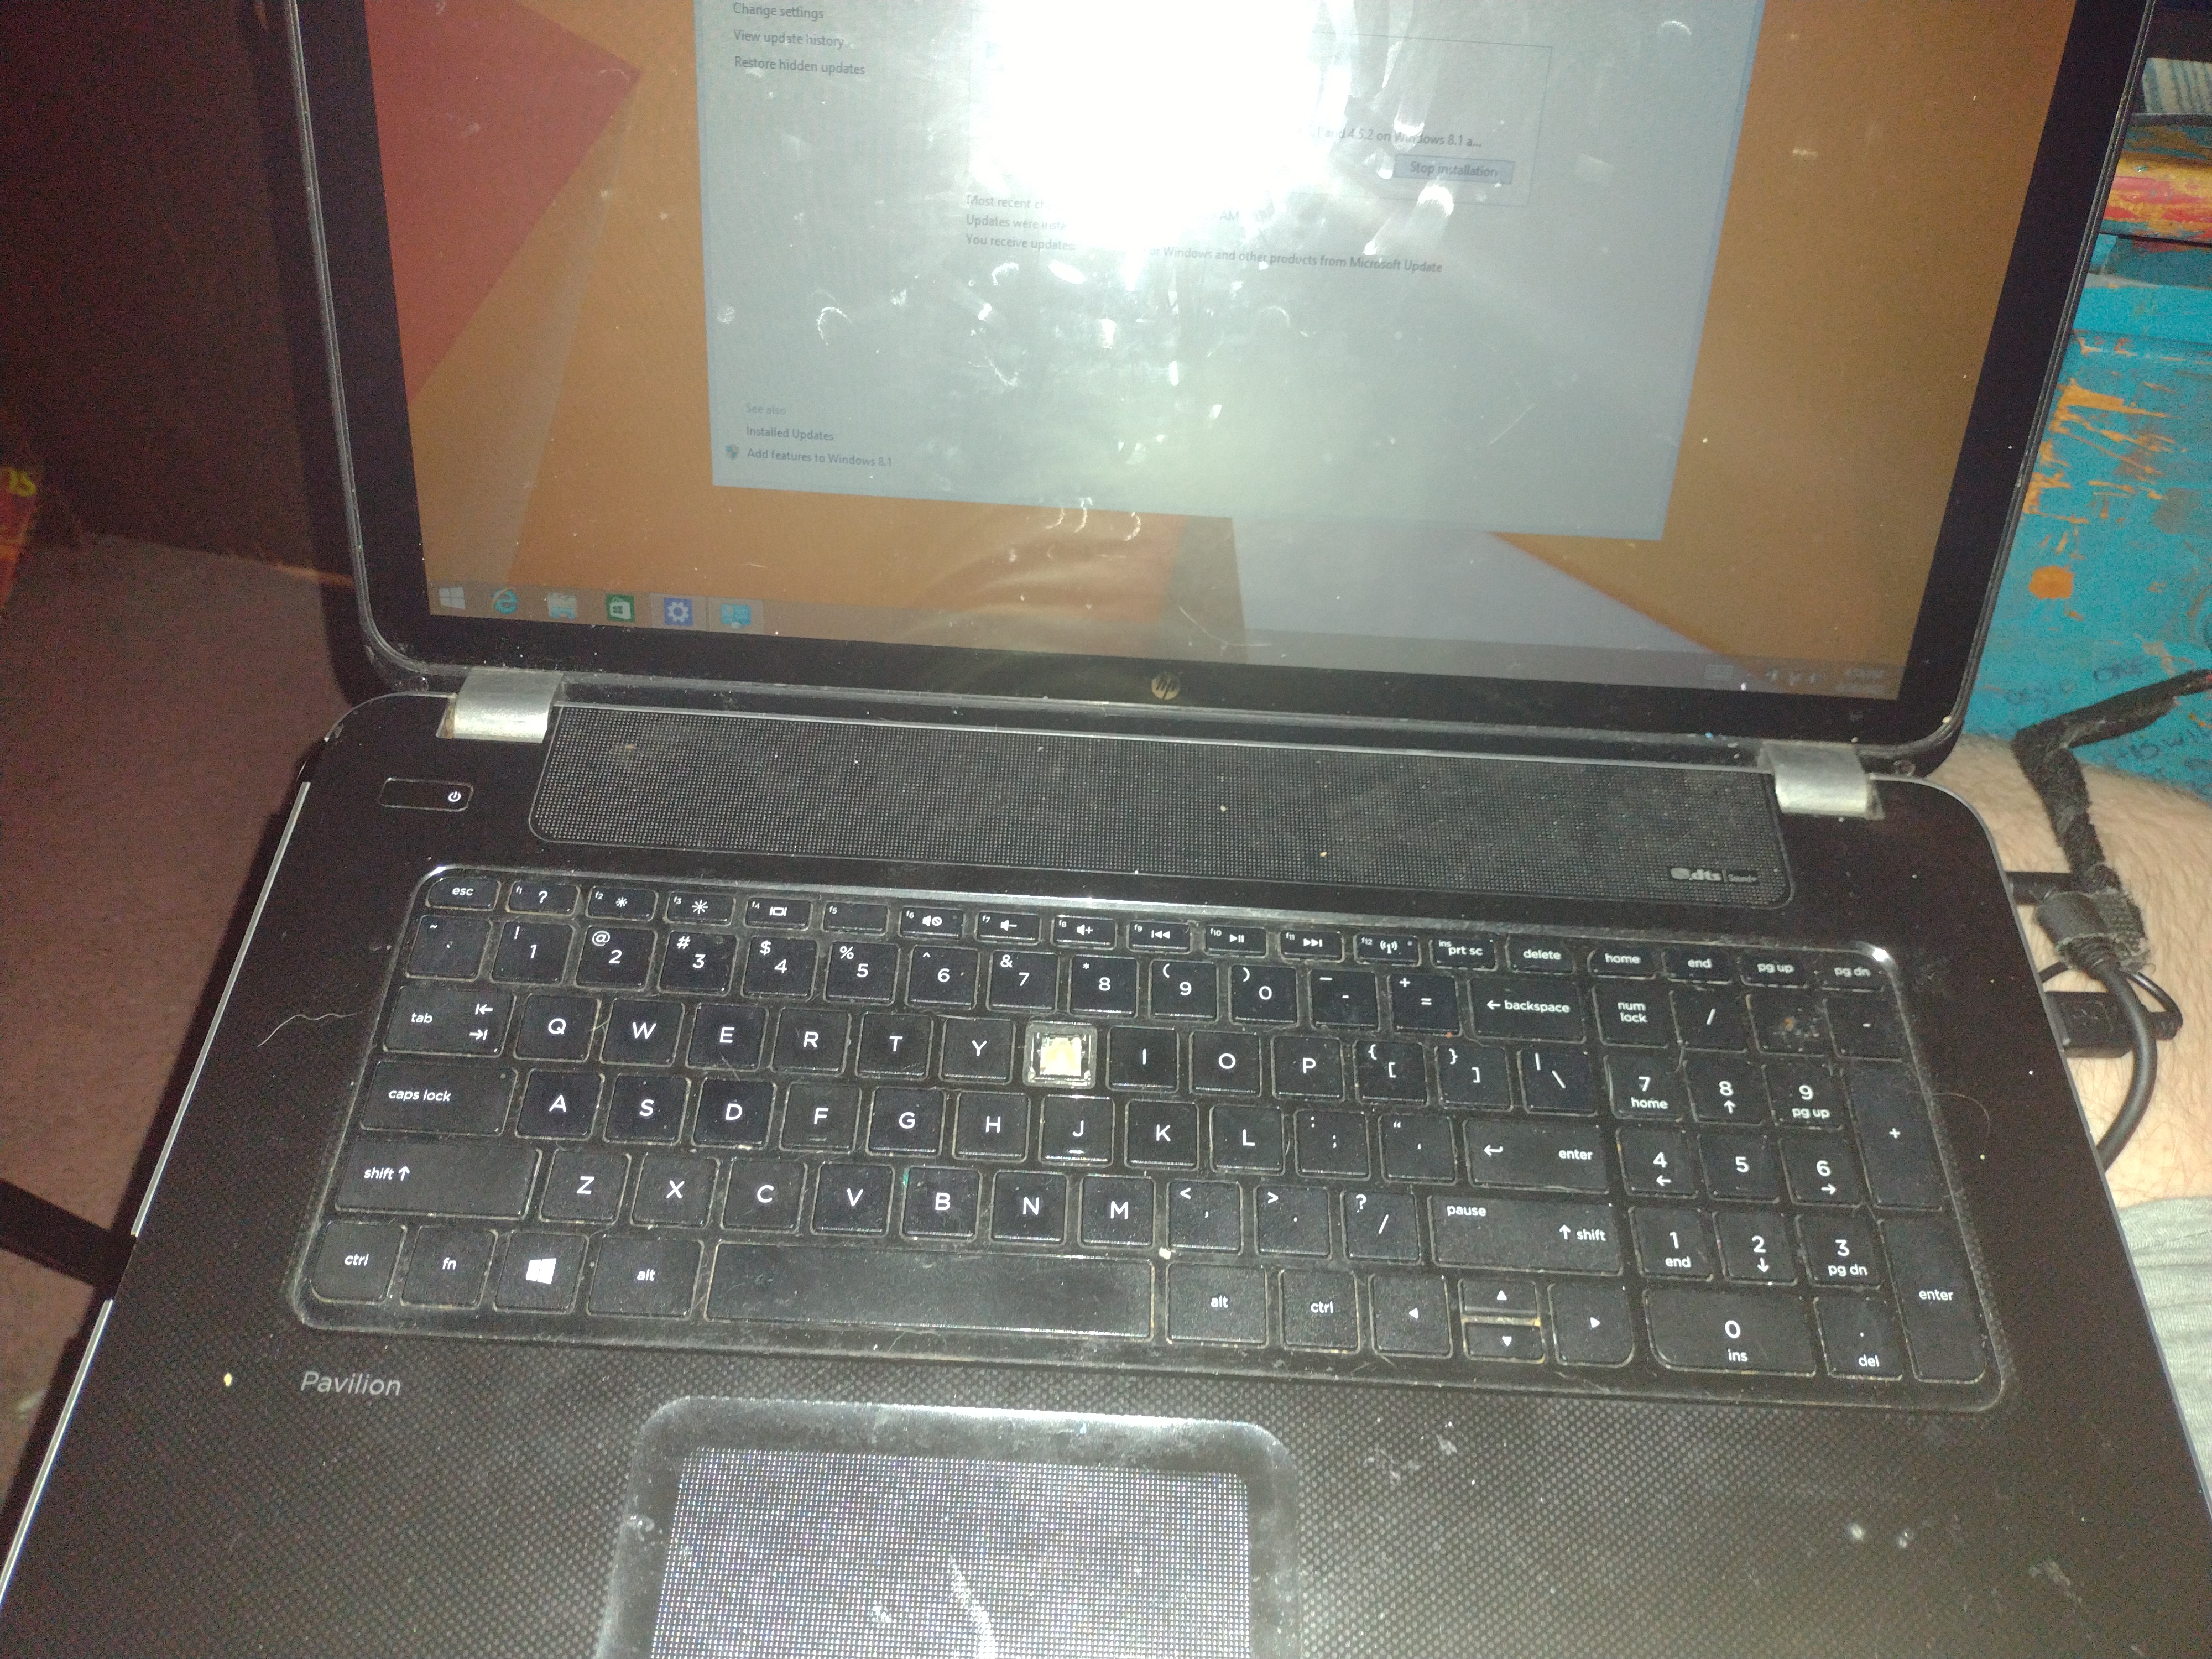 HP Pavilion TS 17 laptop from 2013. Shown in my lap; installing updates on Windows 8.1.